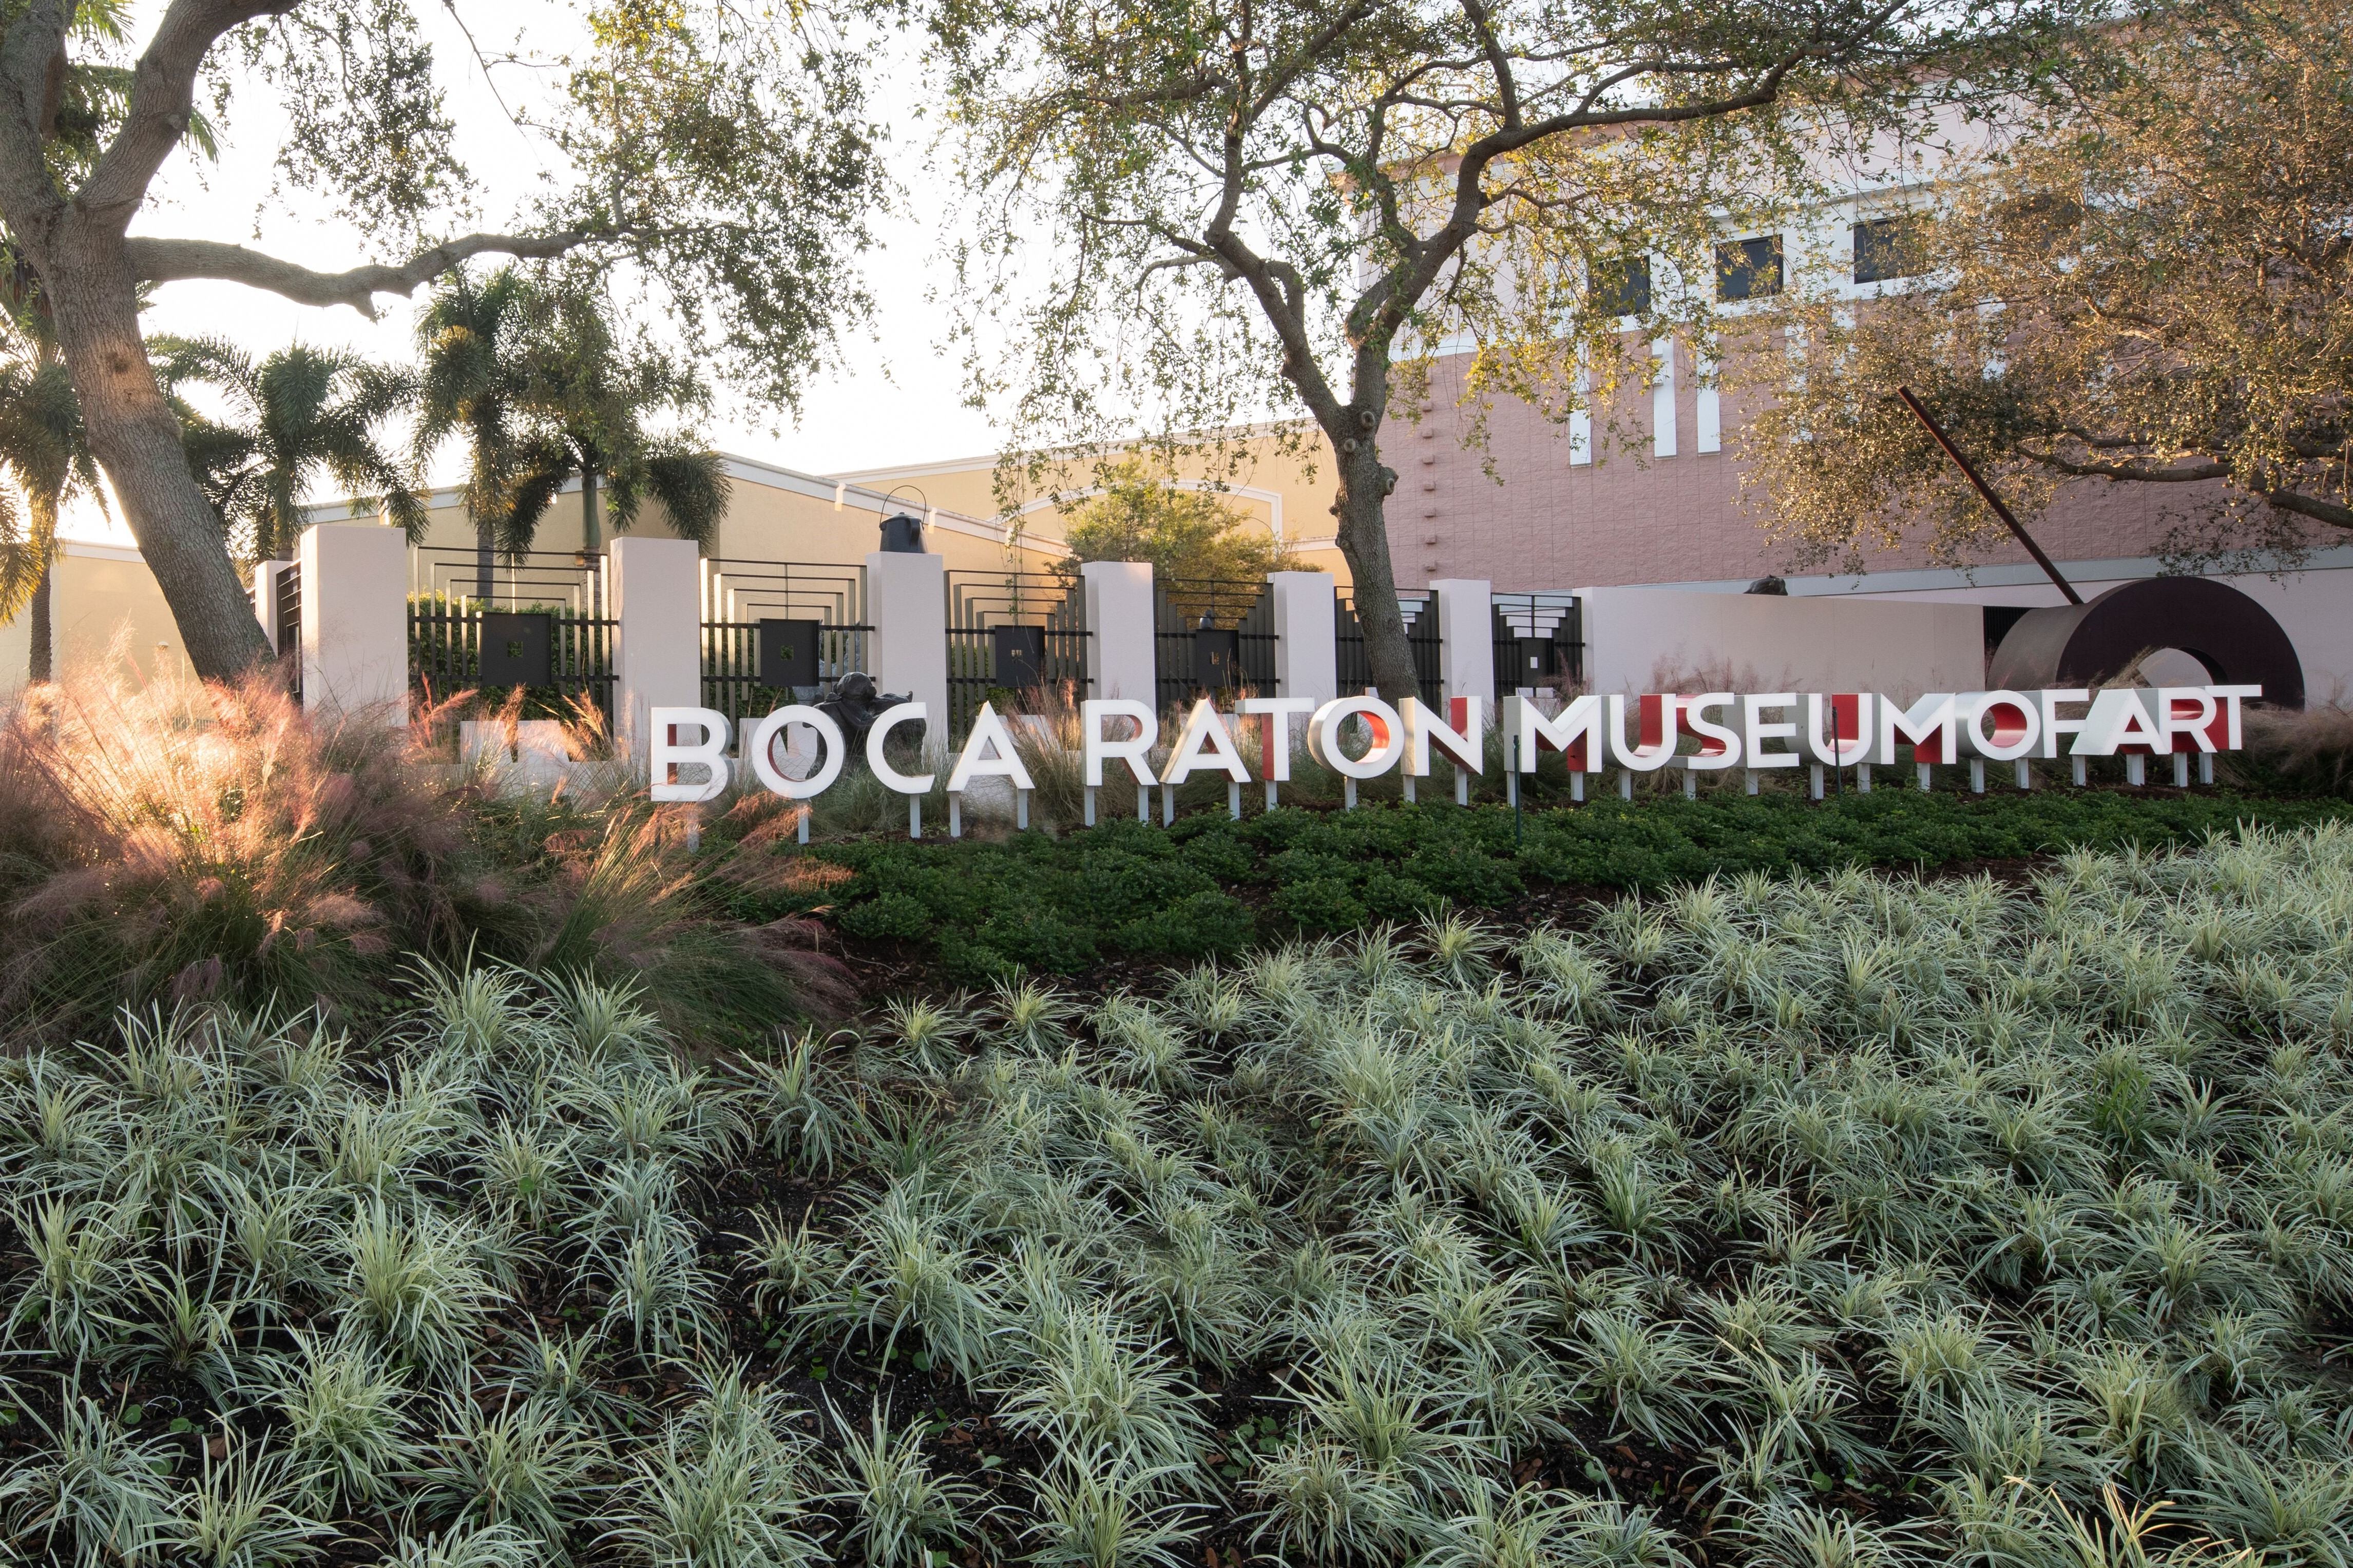 Especially if it’s located, like the Boca Raton Museum of Art, along Federal Highway, within the most trafficked and pedestrian-friendly area of the community.